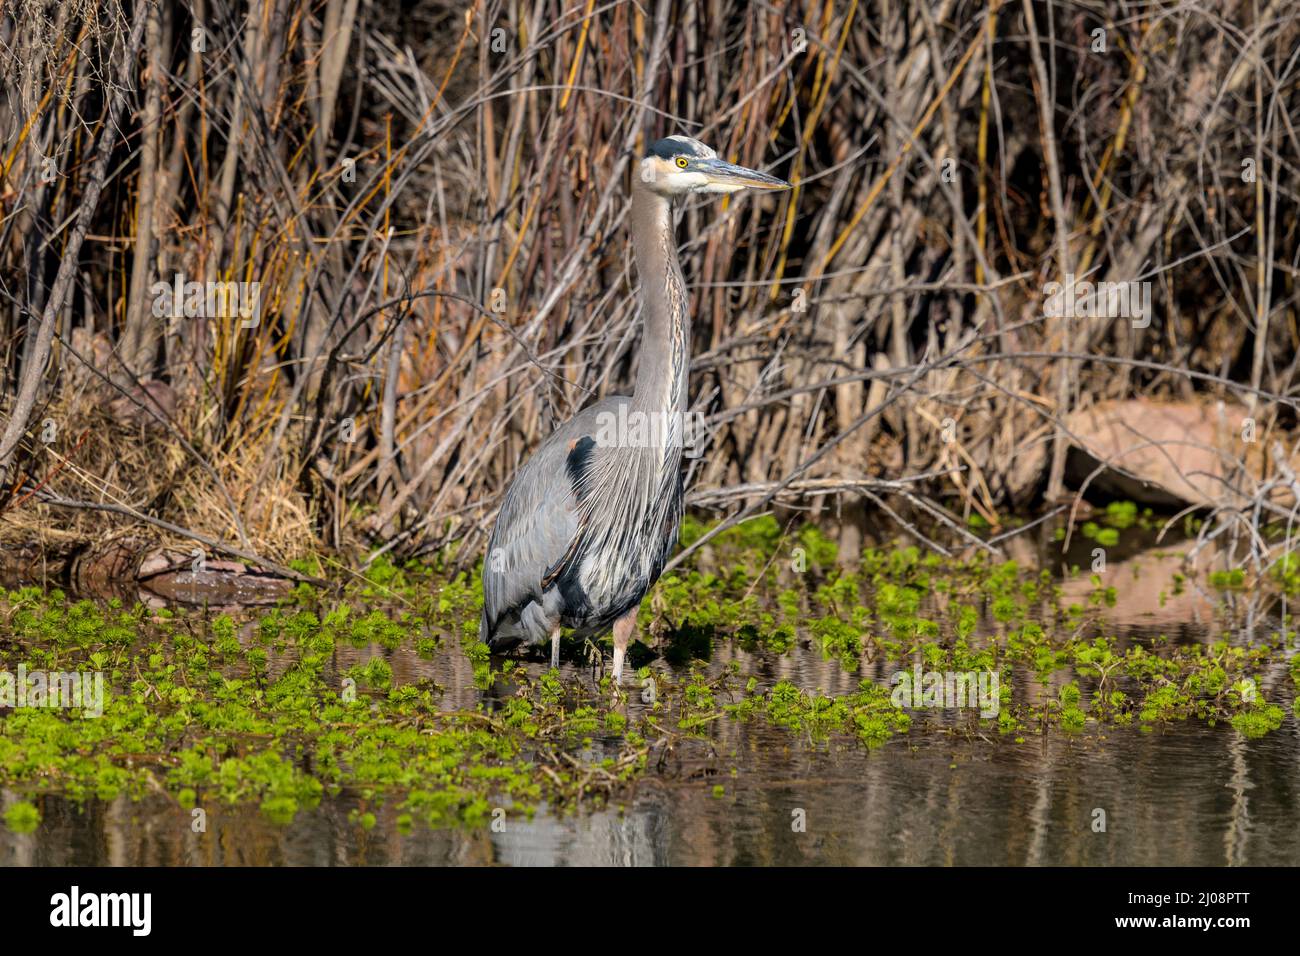 Great Blue Heron - A close-up front view of a Great Blue Heron standing in warm winter sun at side of Rio Grande River. New Mexico, USA. Stock Photo